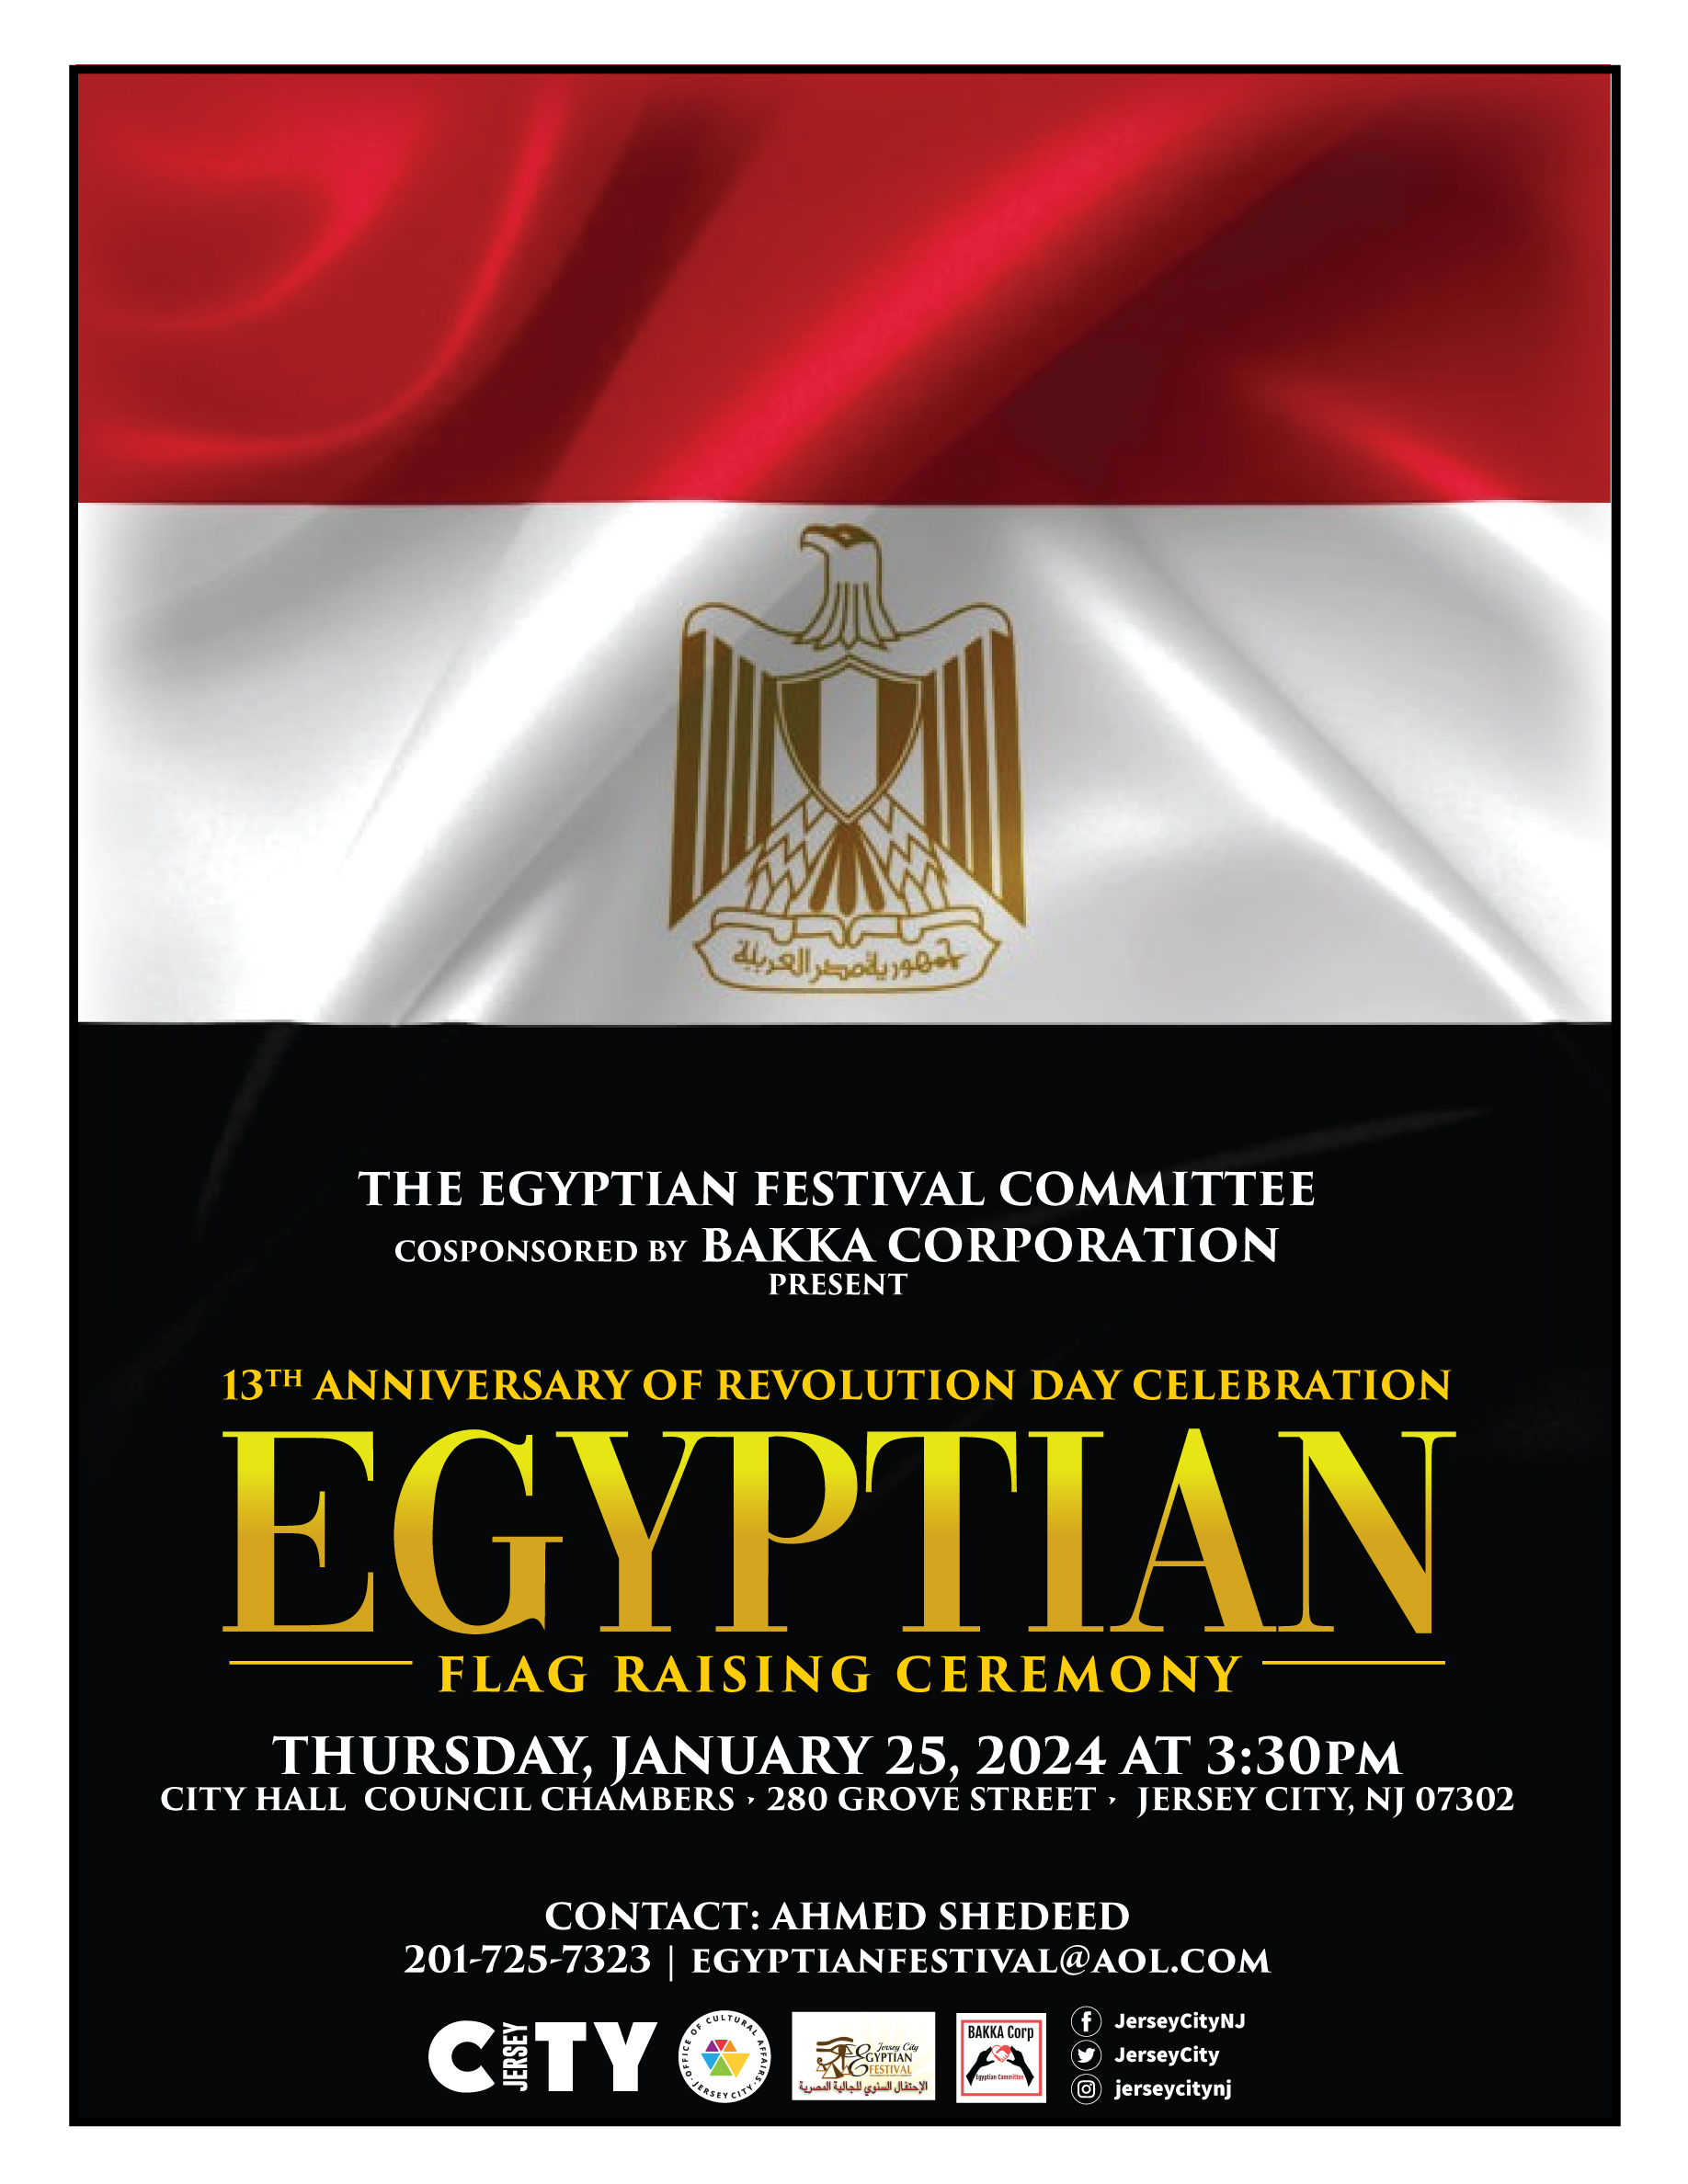 EGYPTIAN FLAG RAISING CEREMONY THURSDAY, JANUARY 25TH AT 3:30PM IN CITY HALL CHAMBERS